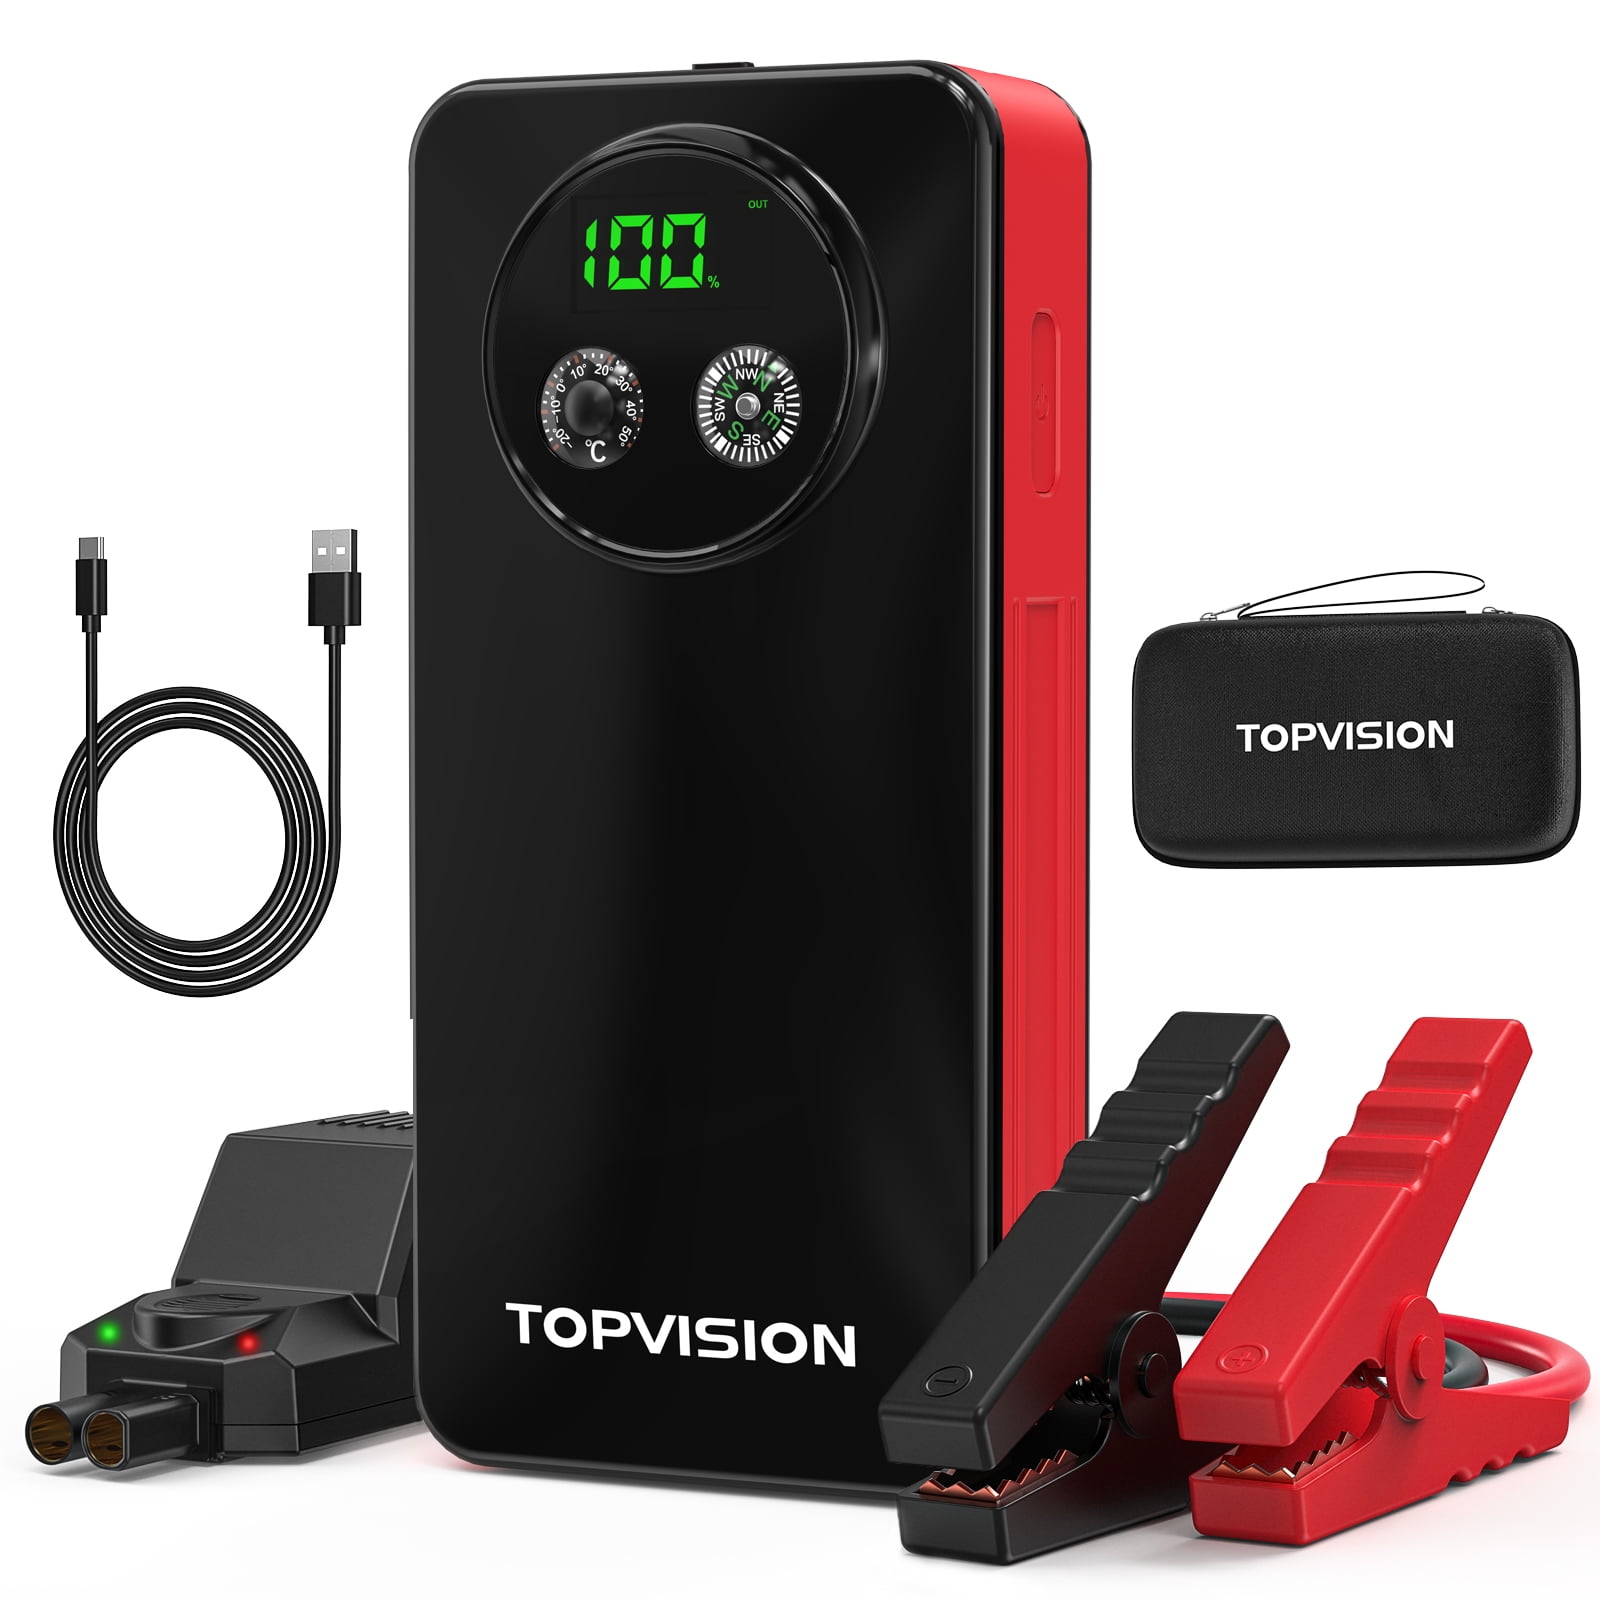 Topvision 2500A Car Jump Starter Powerful Car Jump Starter with Dual USB Quick Charge and DC Output,12V Jump Pack with Built-In LED Bright Light, Red